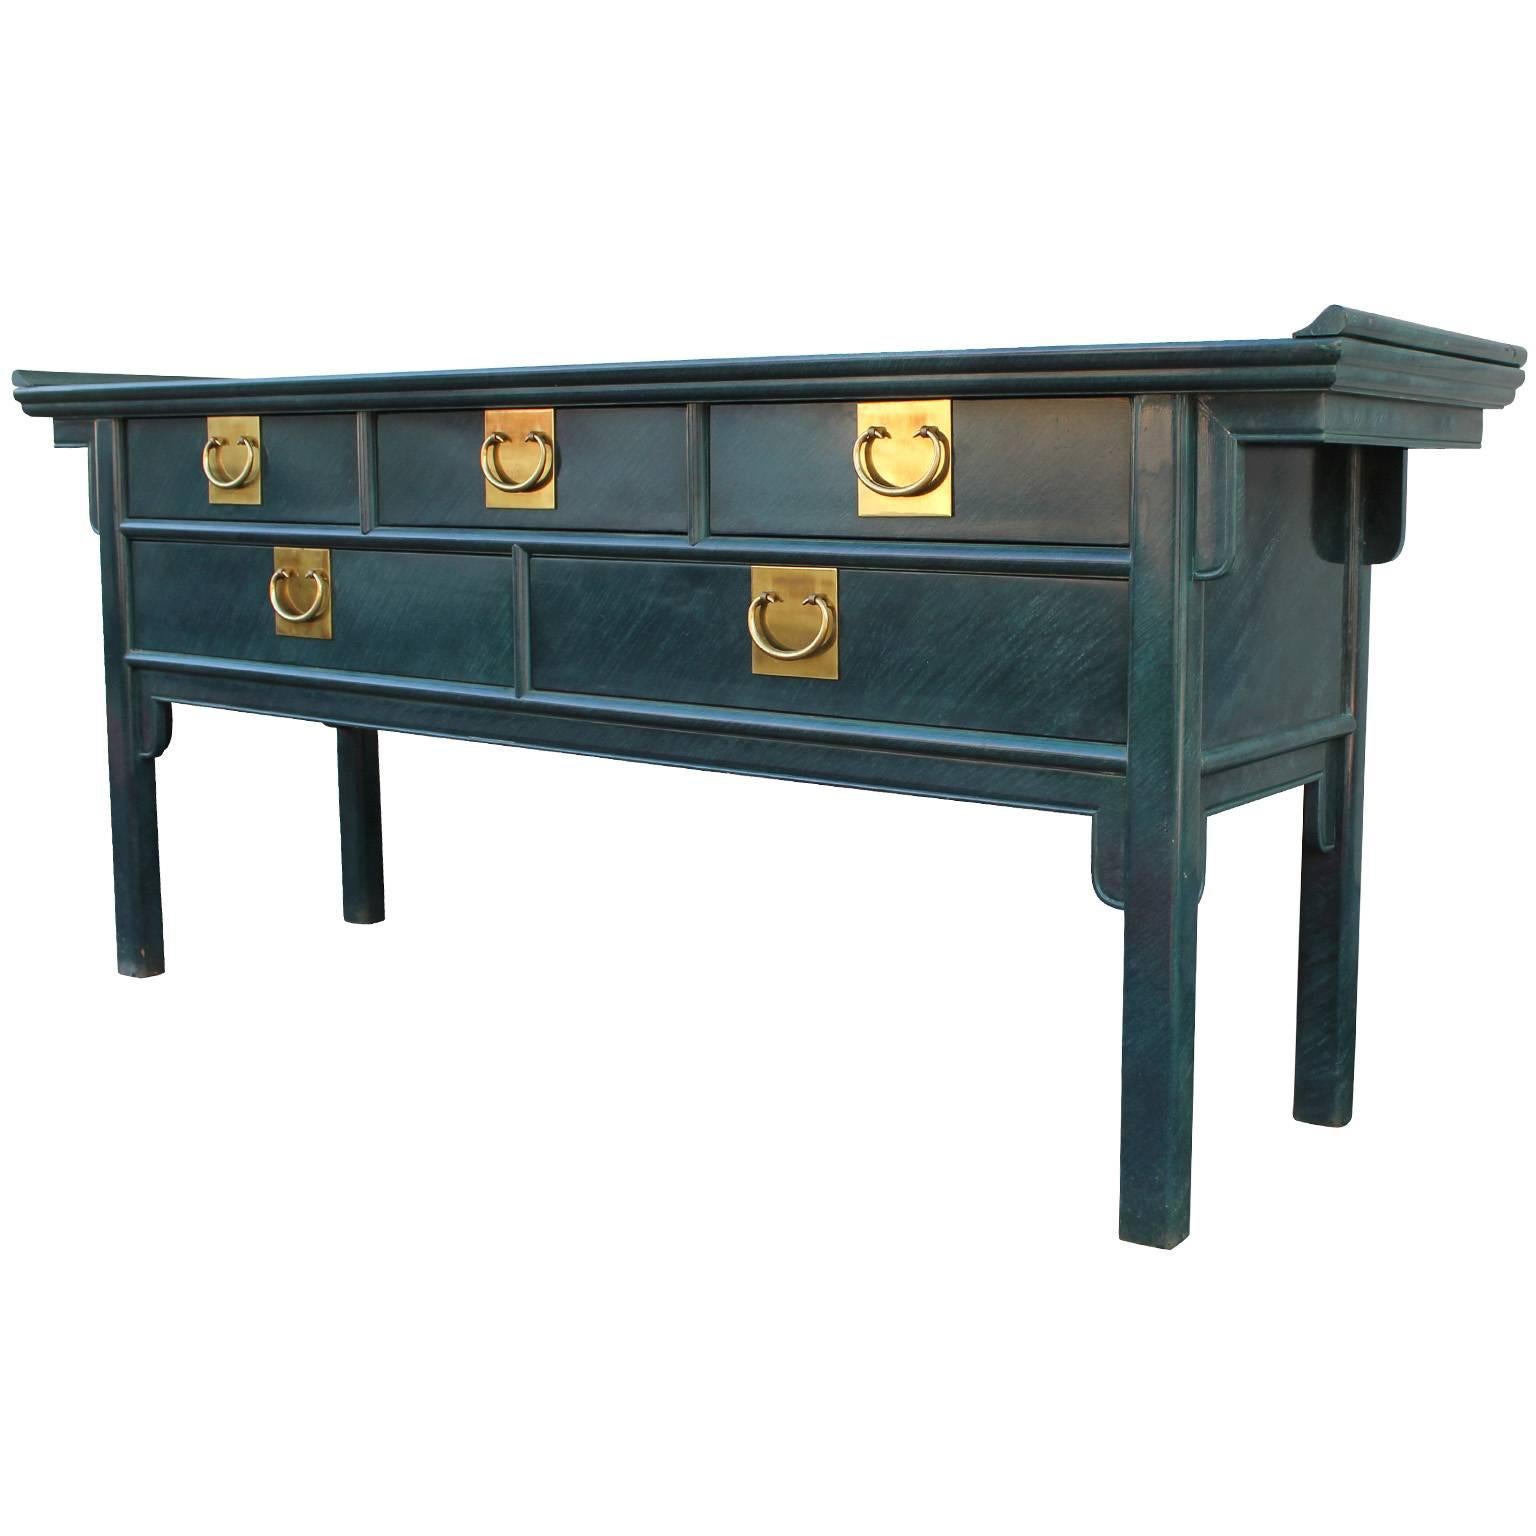 Beautiful lacquered console table made by Century Furniture with Brass Hardware.  It is a deep malachite green faux finish. The console table is in overall nice condition with a few older touch-ups. 